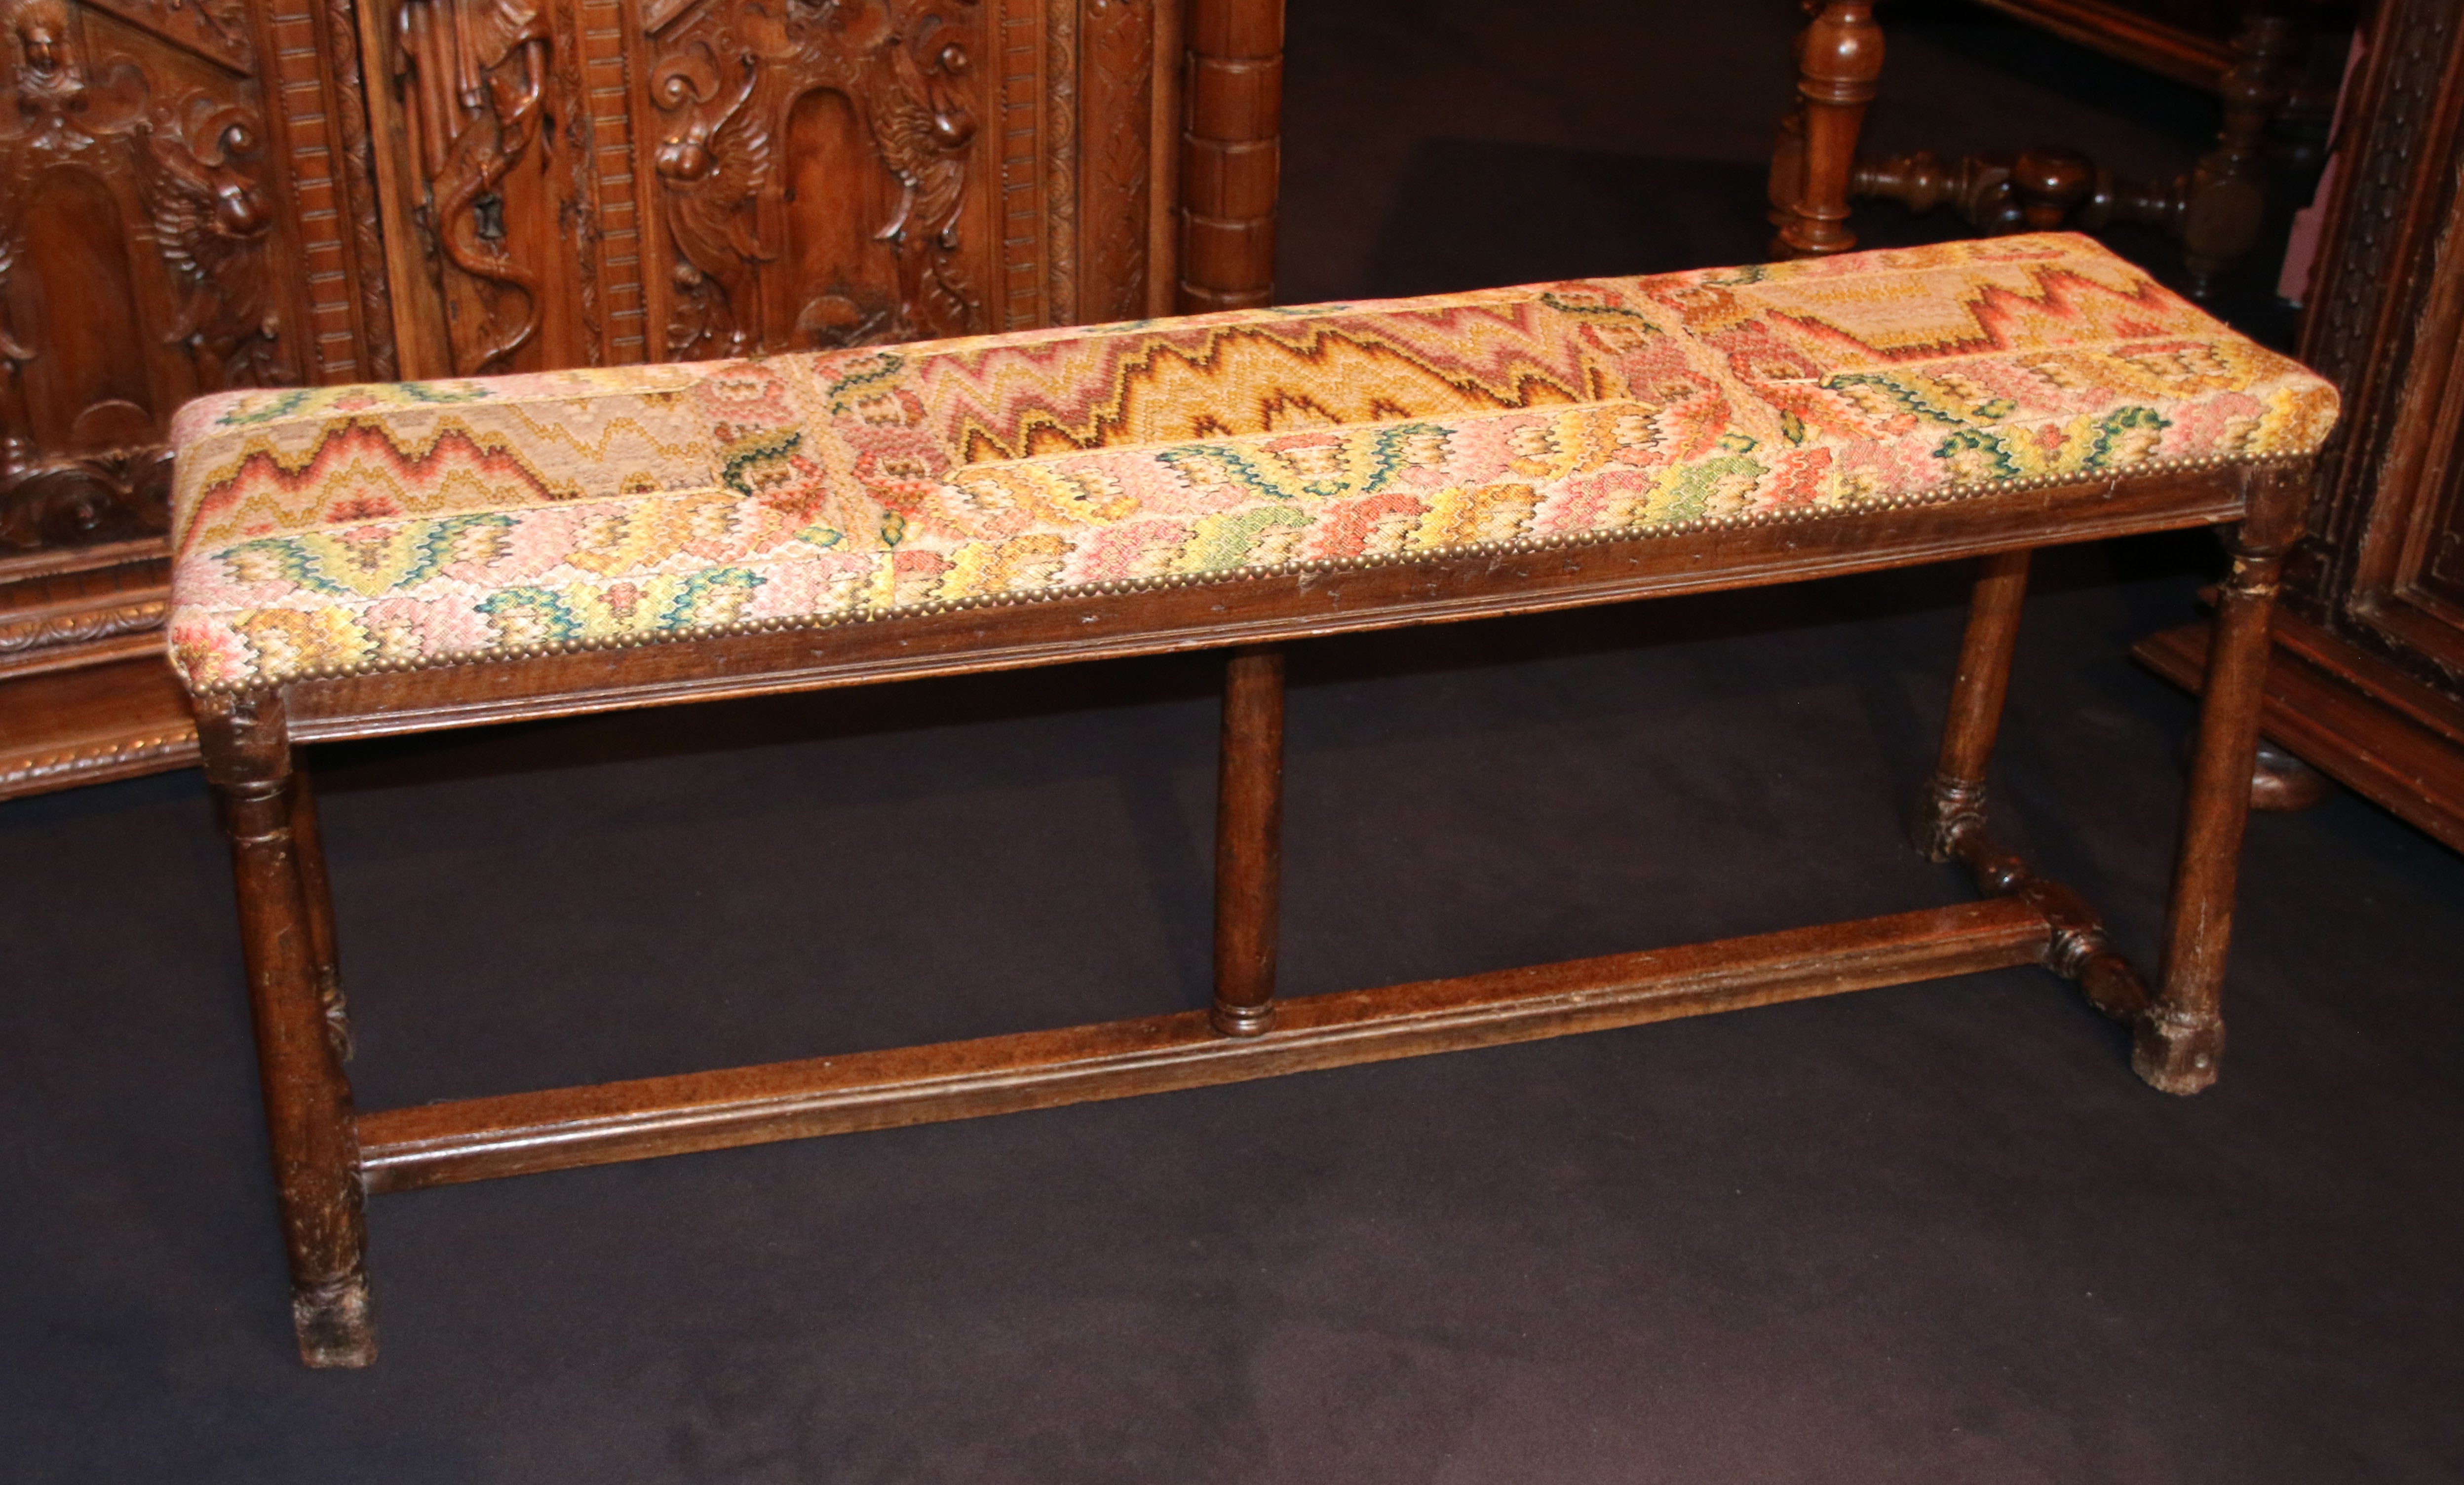 This small bench seat is curiously formed of five legs turned in the form of a smooth column, two by sides and a fifth rests on the longitudinal strut.
The bottom of the seat is solidly constituted by a board carried by the belt crosspieces, on